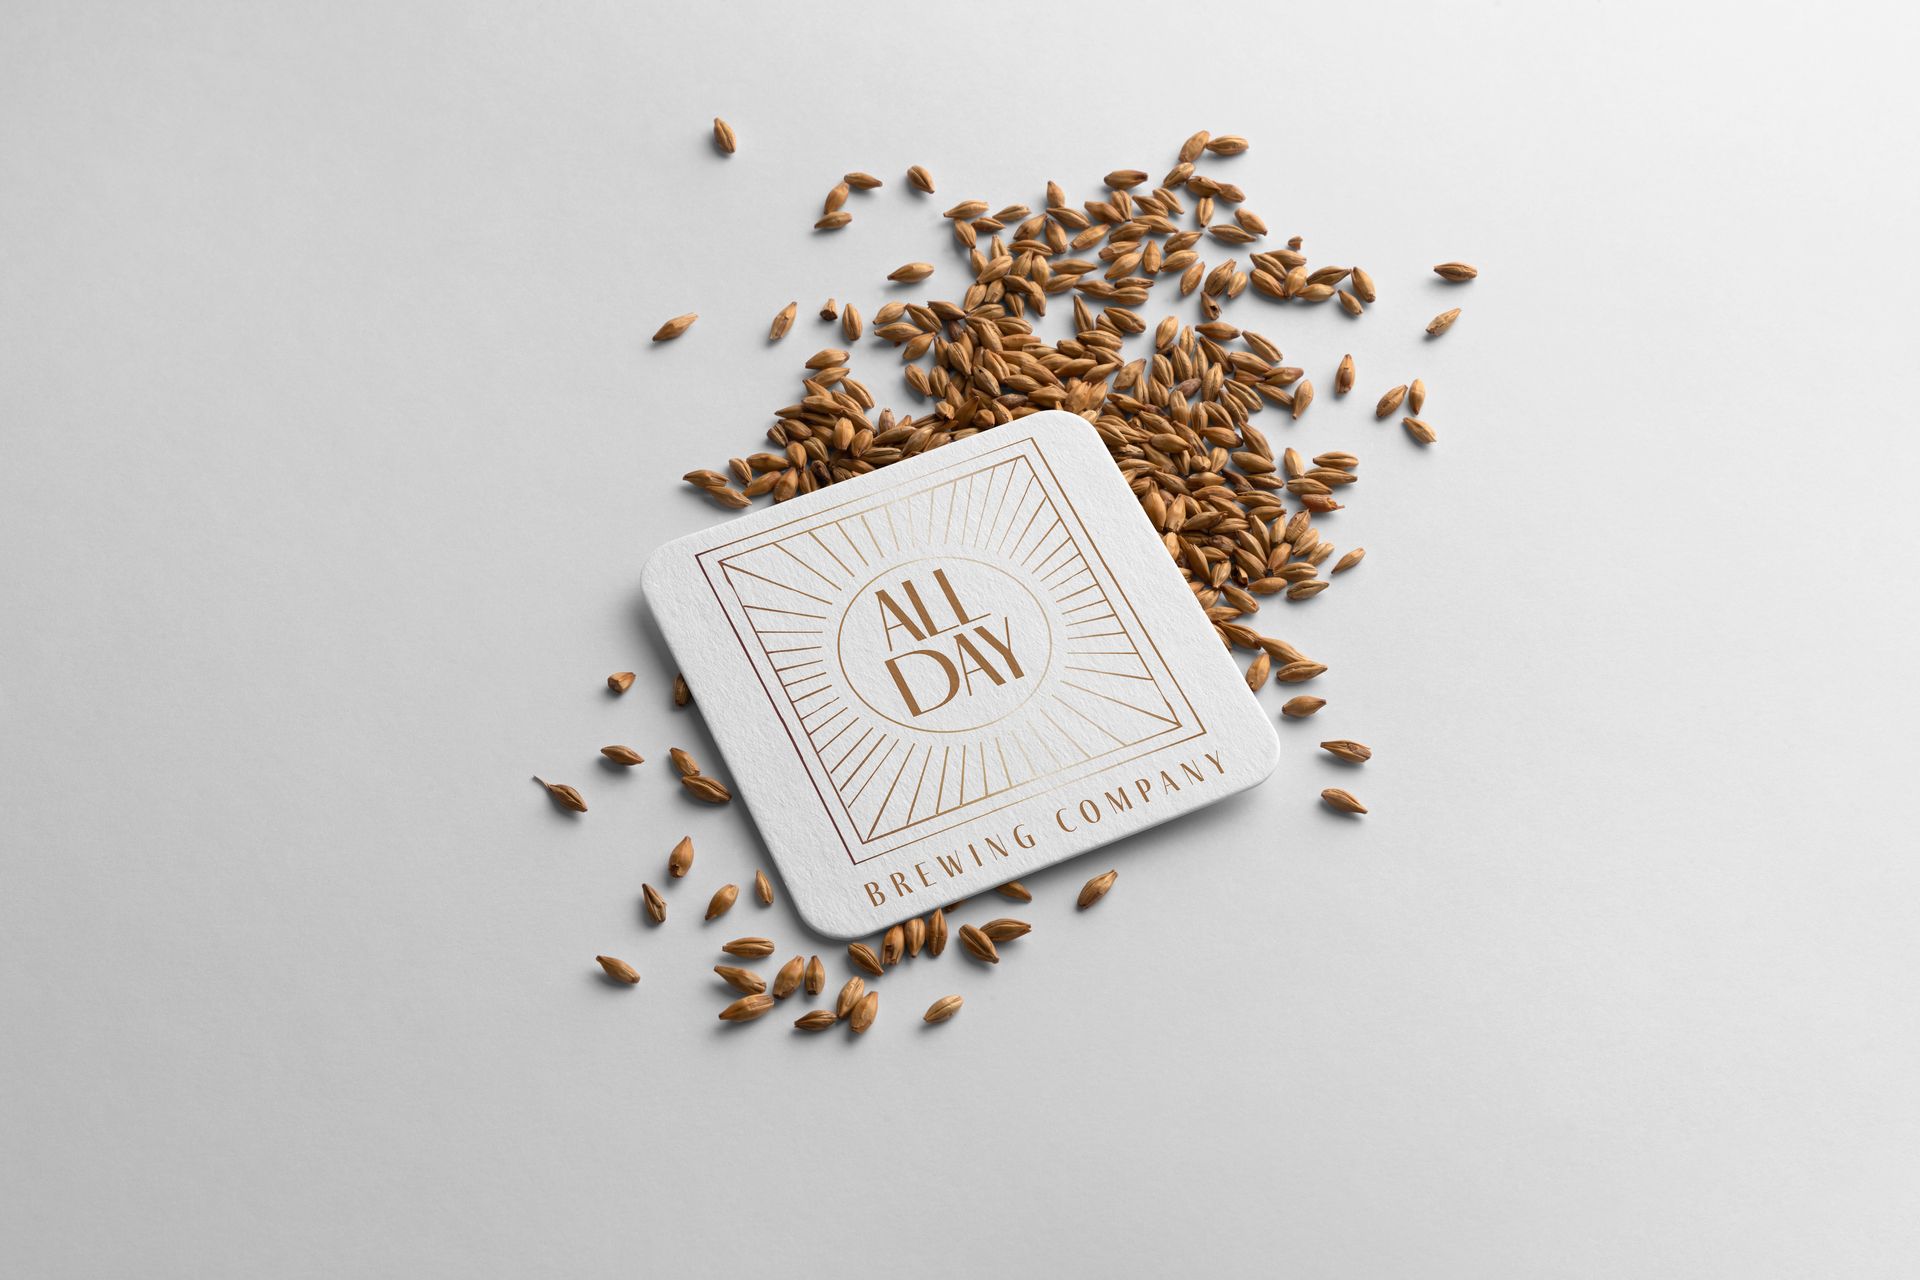 A business card is sitting on top of a pile of grains.